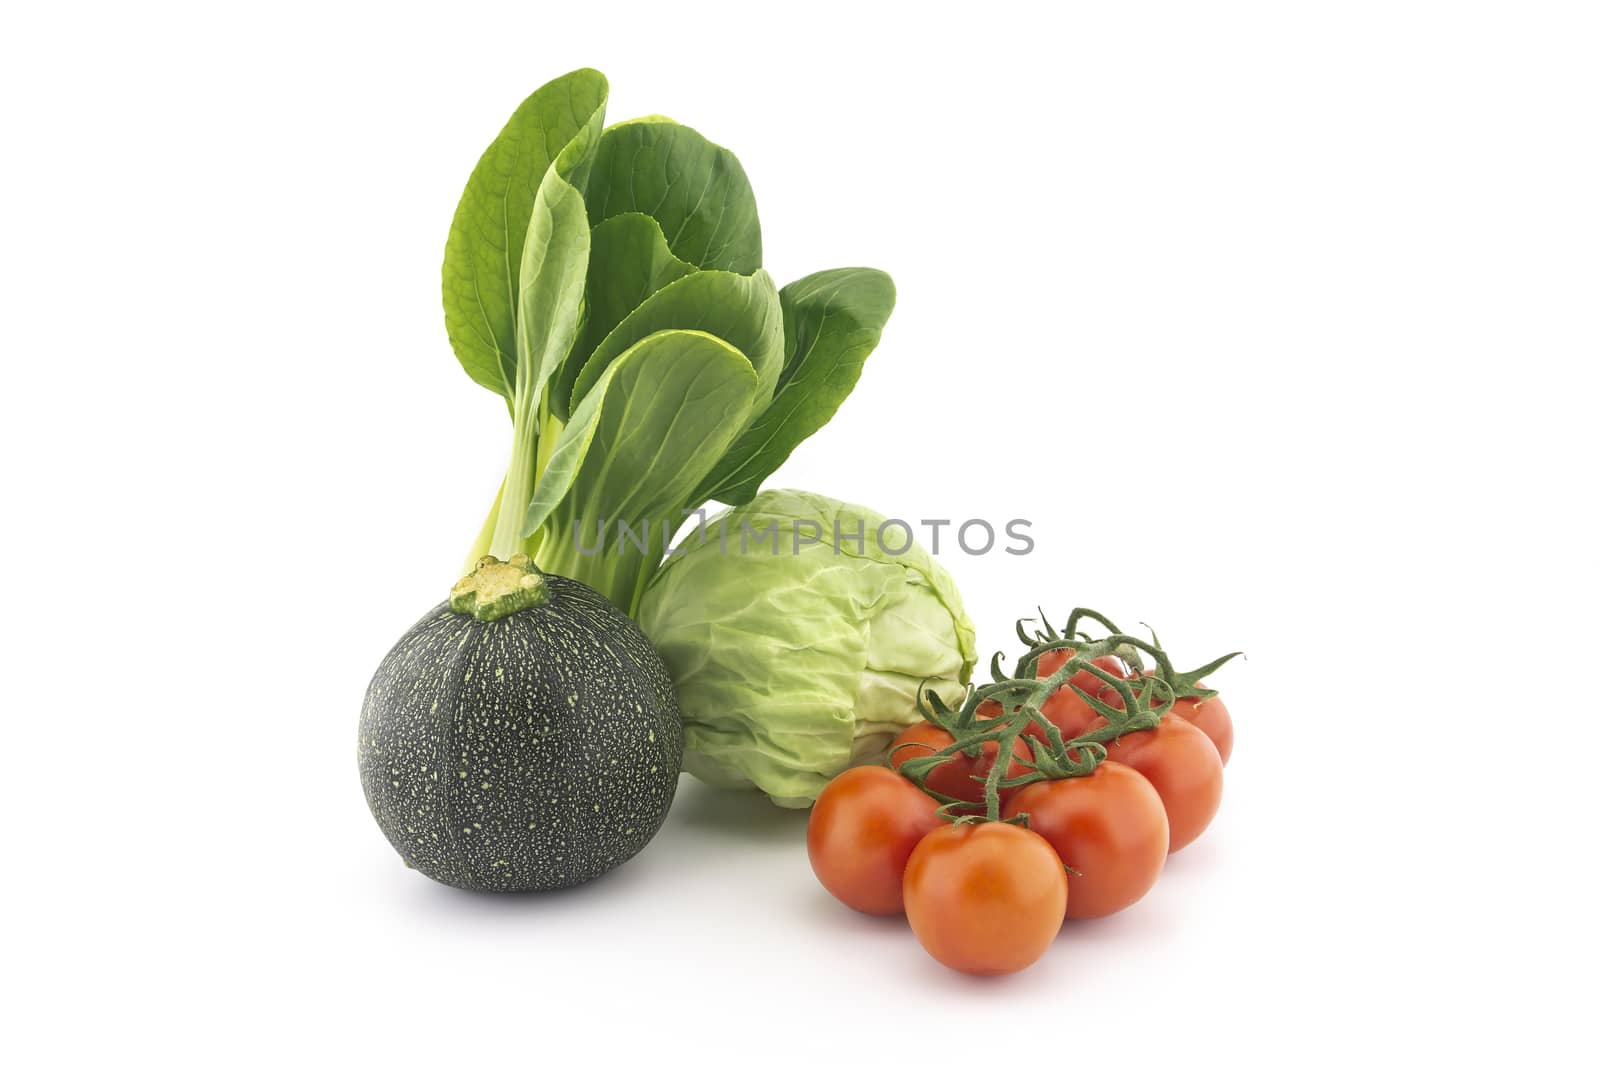 Chinese cabbage and white cabbage green round courgette or zucchini and cherry tomato twig isolated on white background